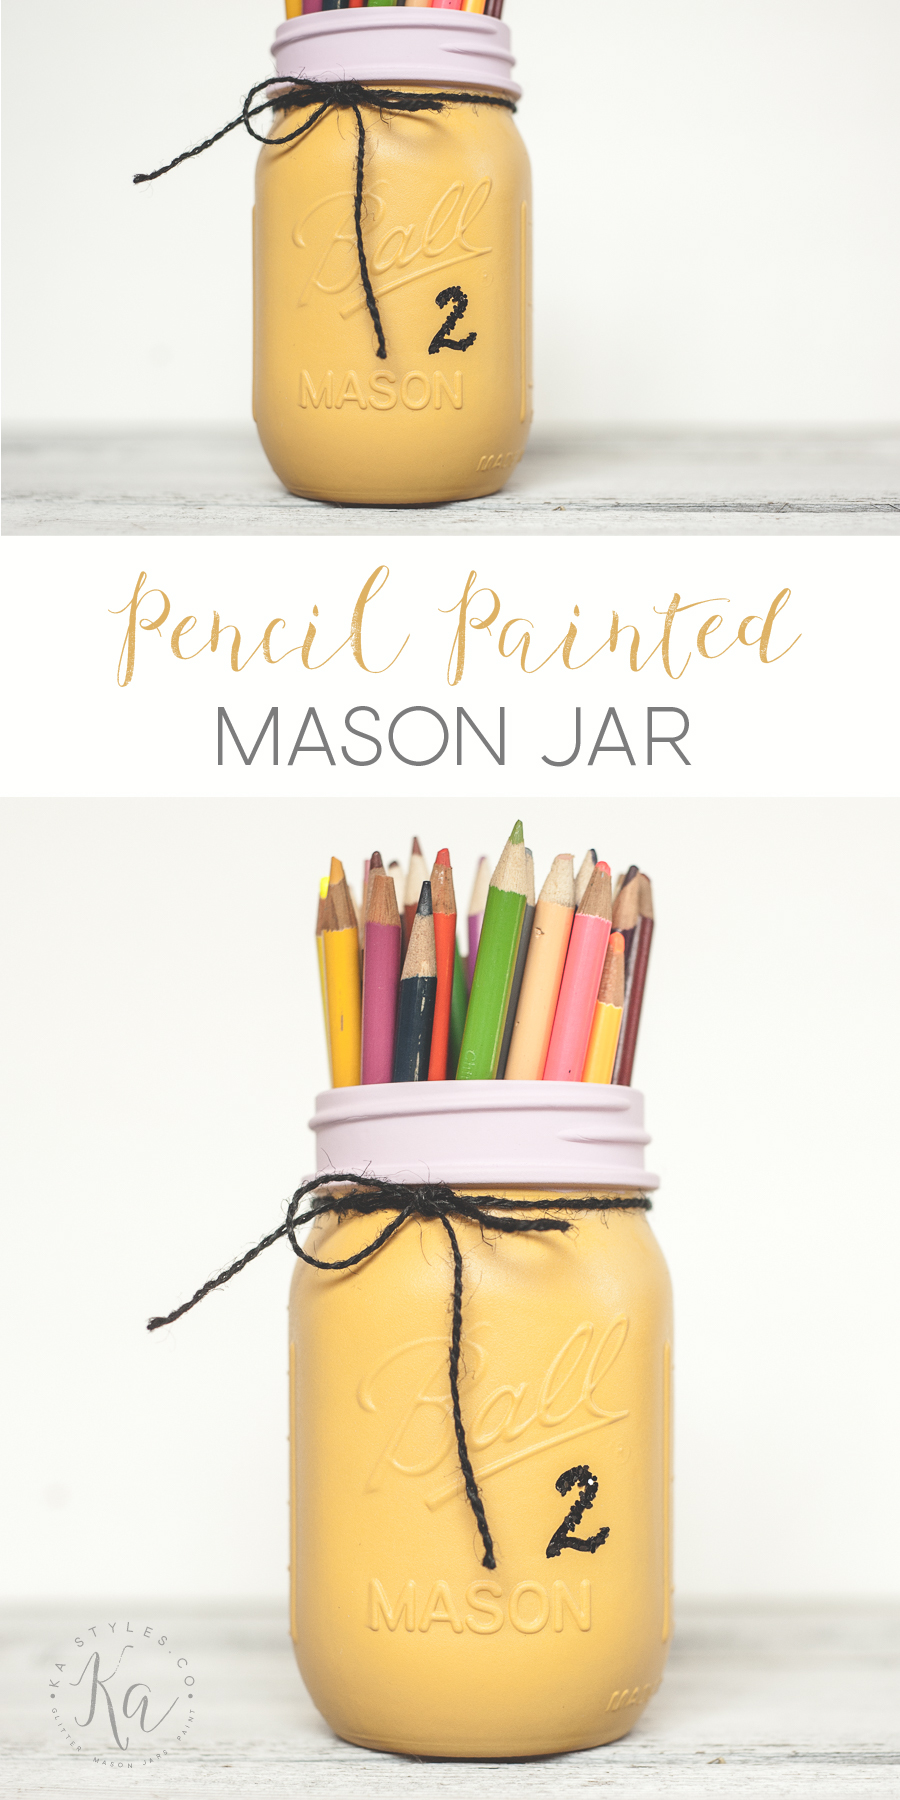 DIY Pencil painted mason jare perfect for a teacher or pencil artist. Using ckalky finish spray paint and a bit of glitter.